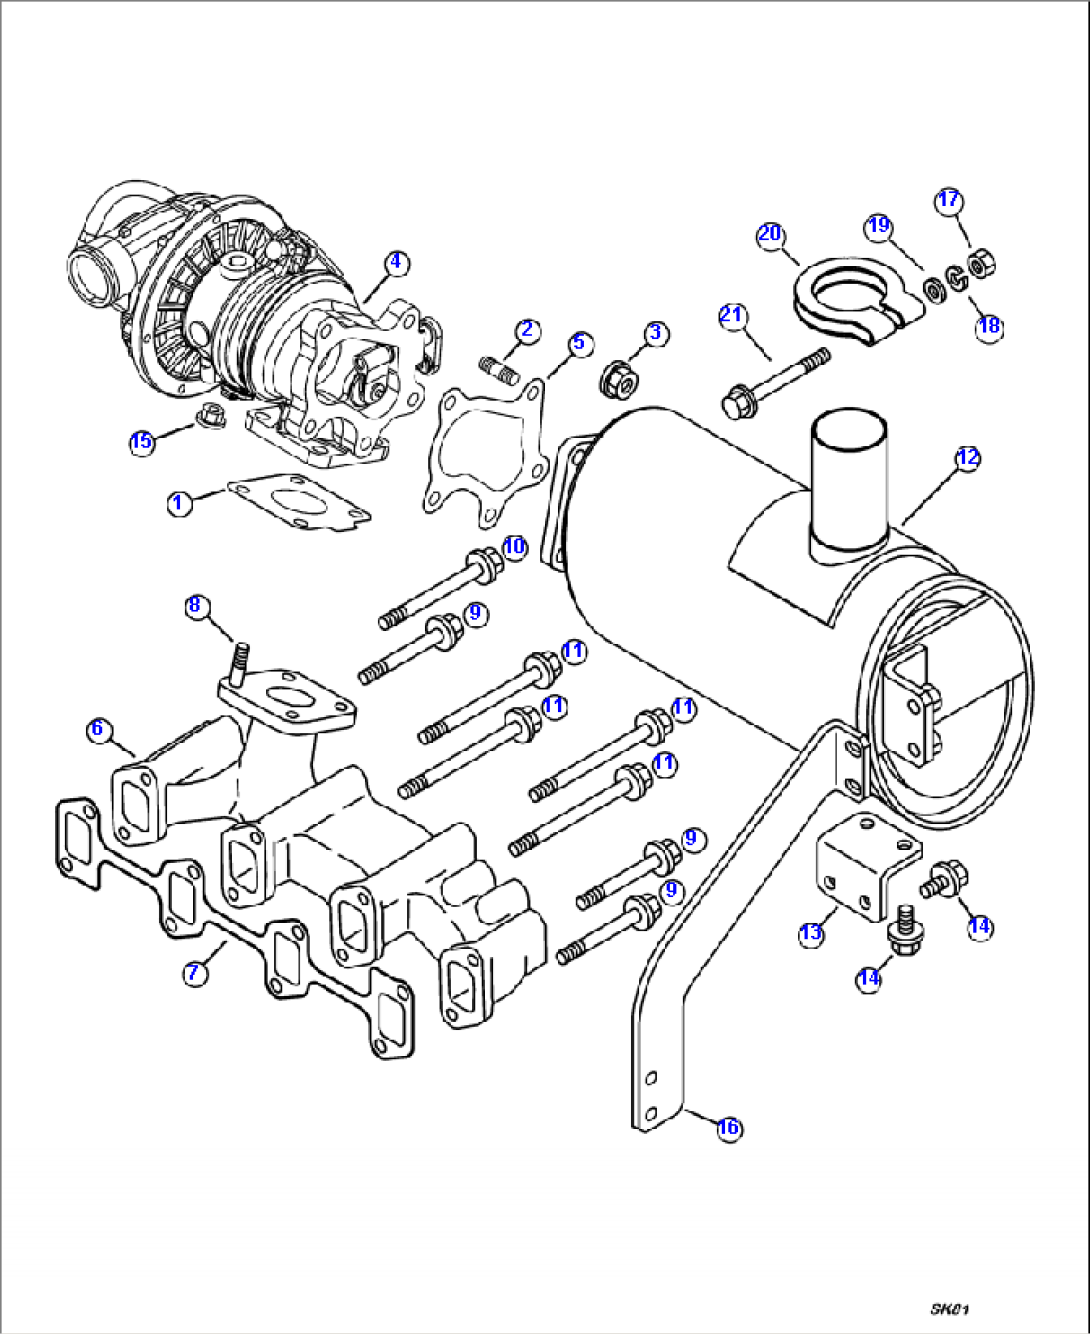 A0015-0100 TURBOCHARGER AND EXHAUST